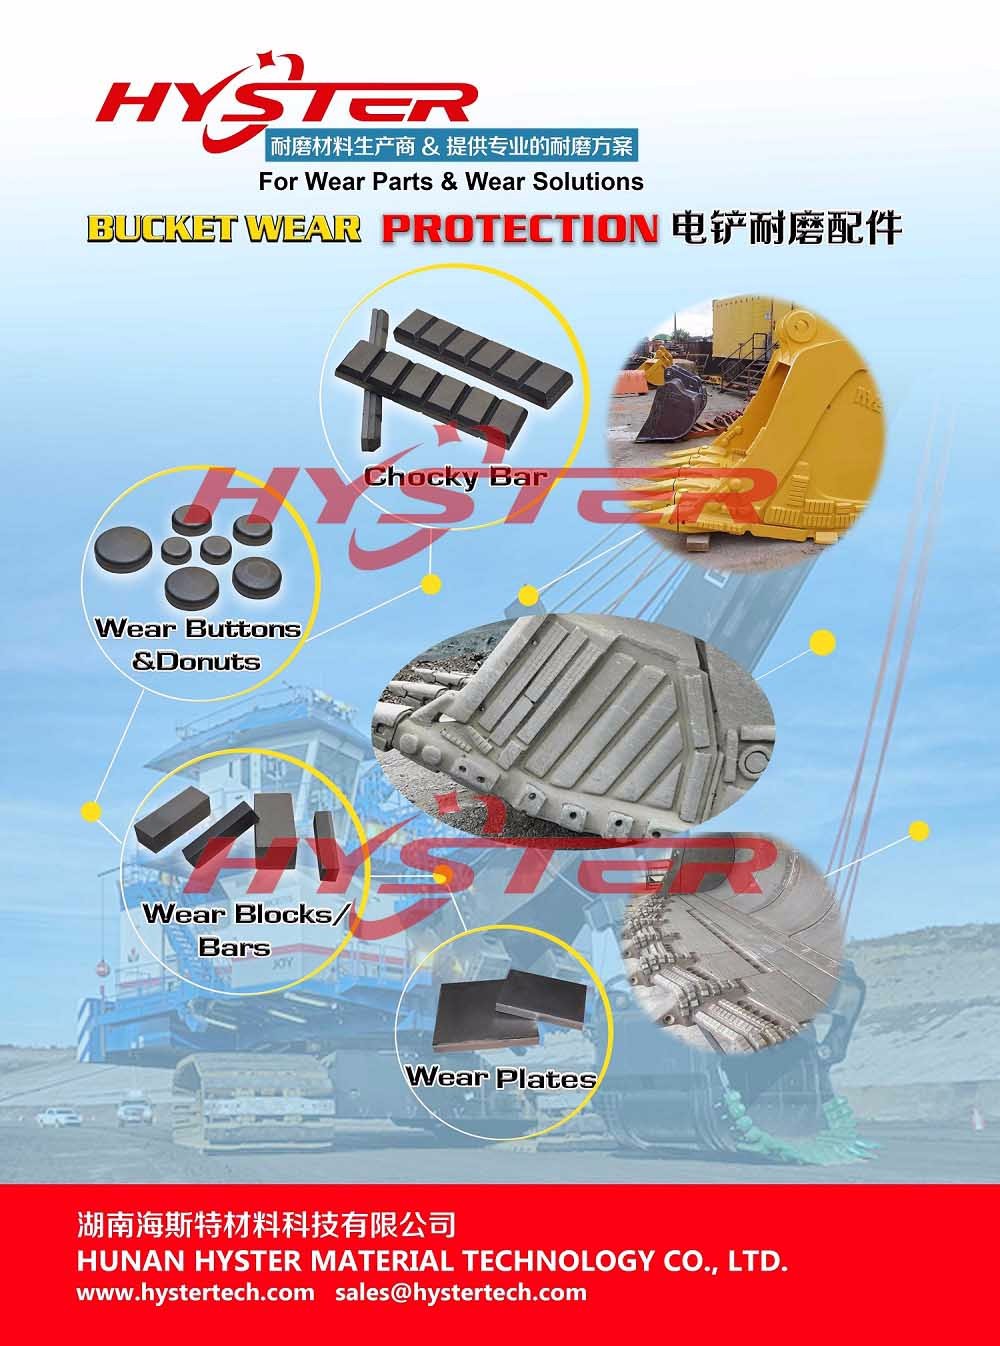 Bucket wear protectors help to keep buckets in a long time usage